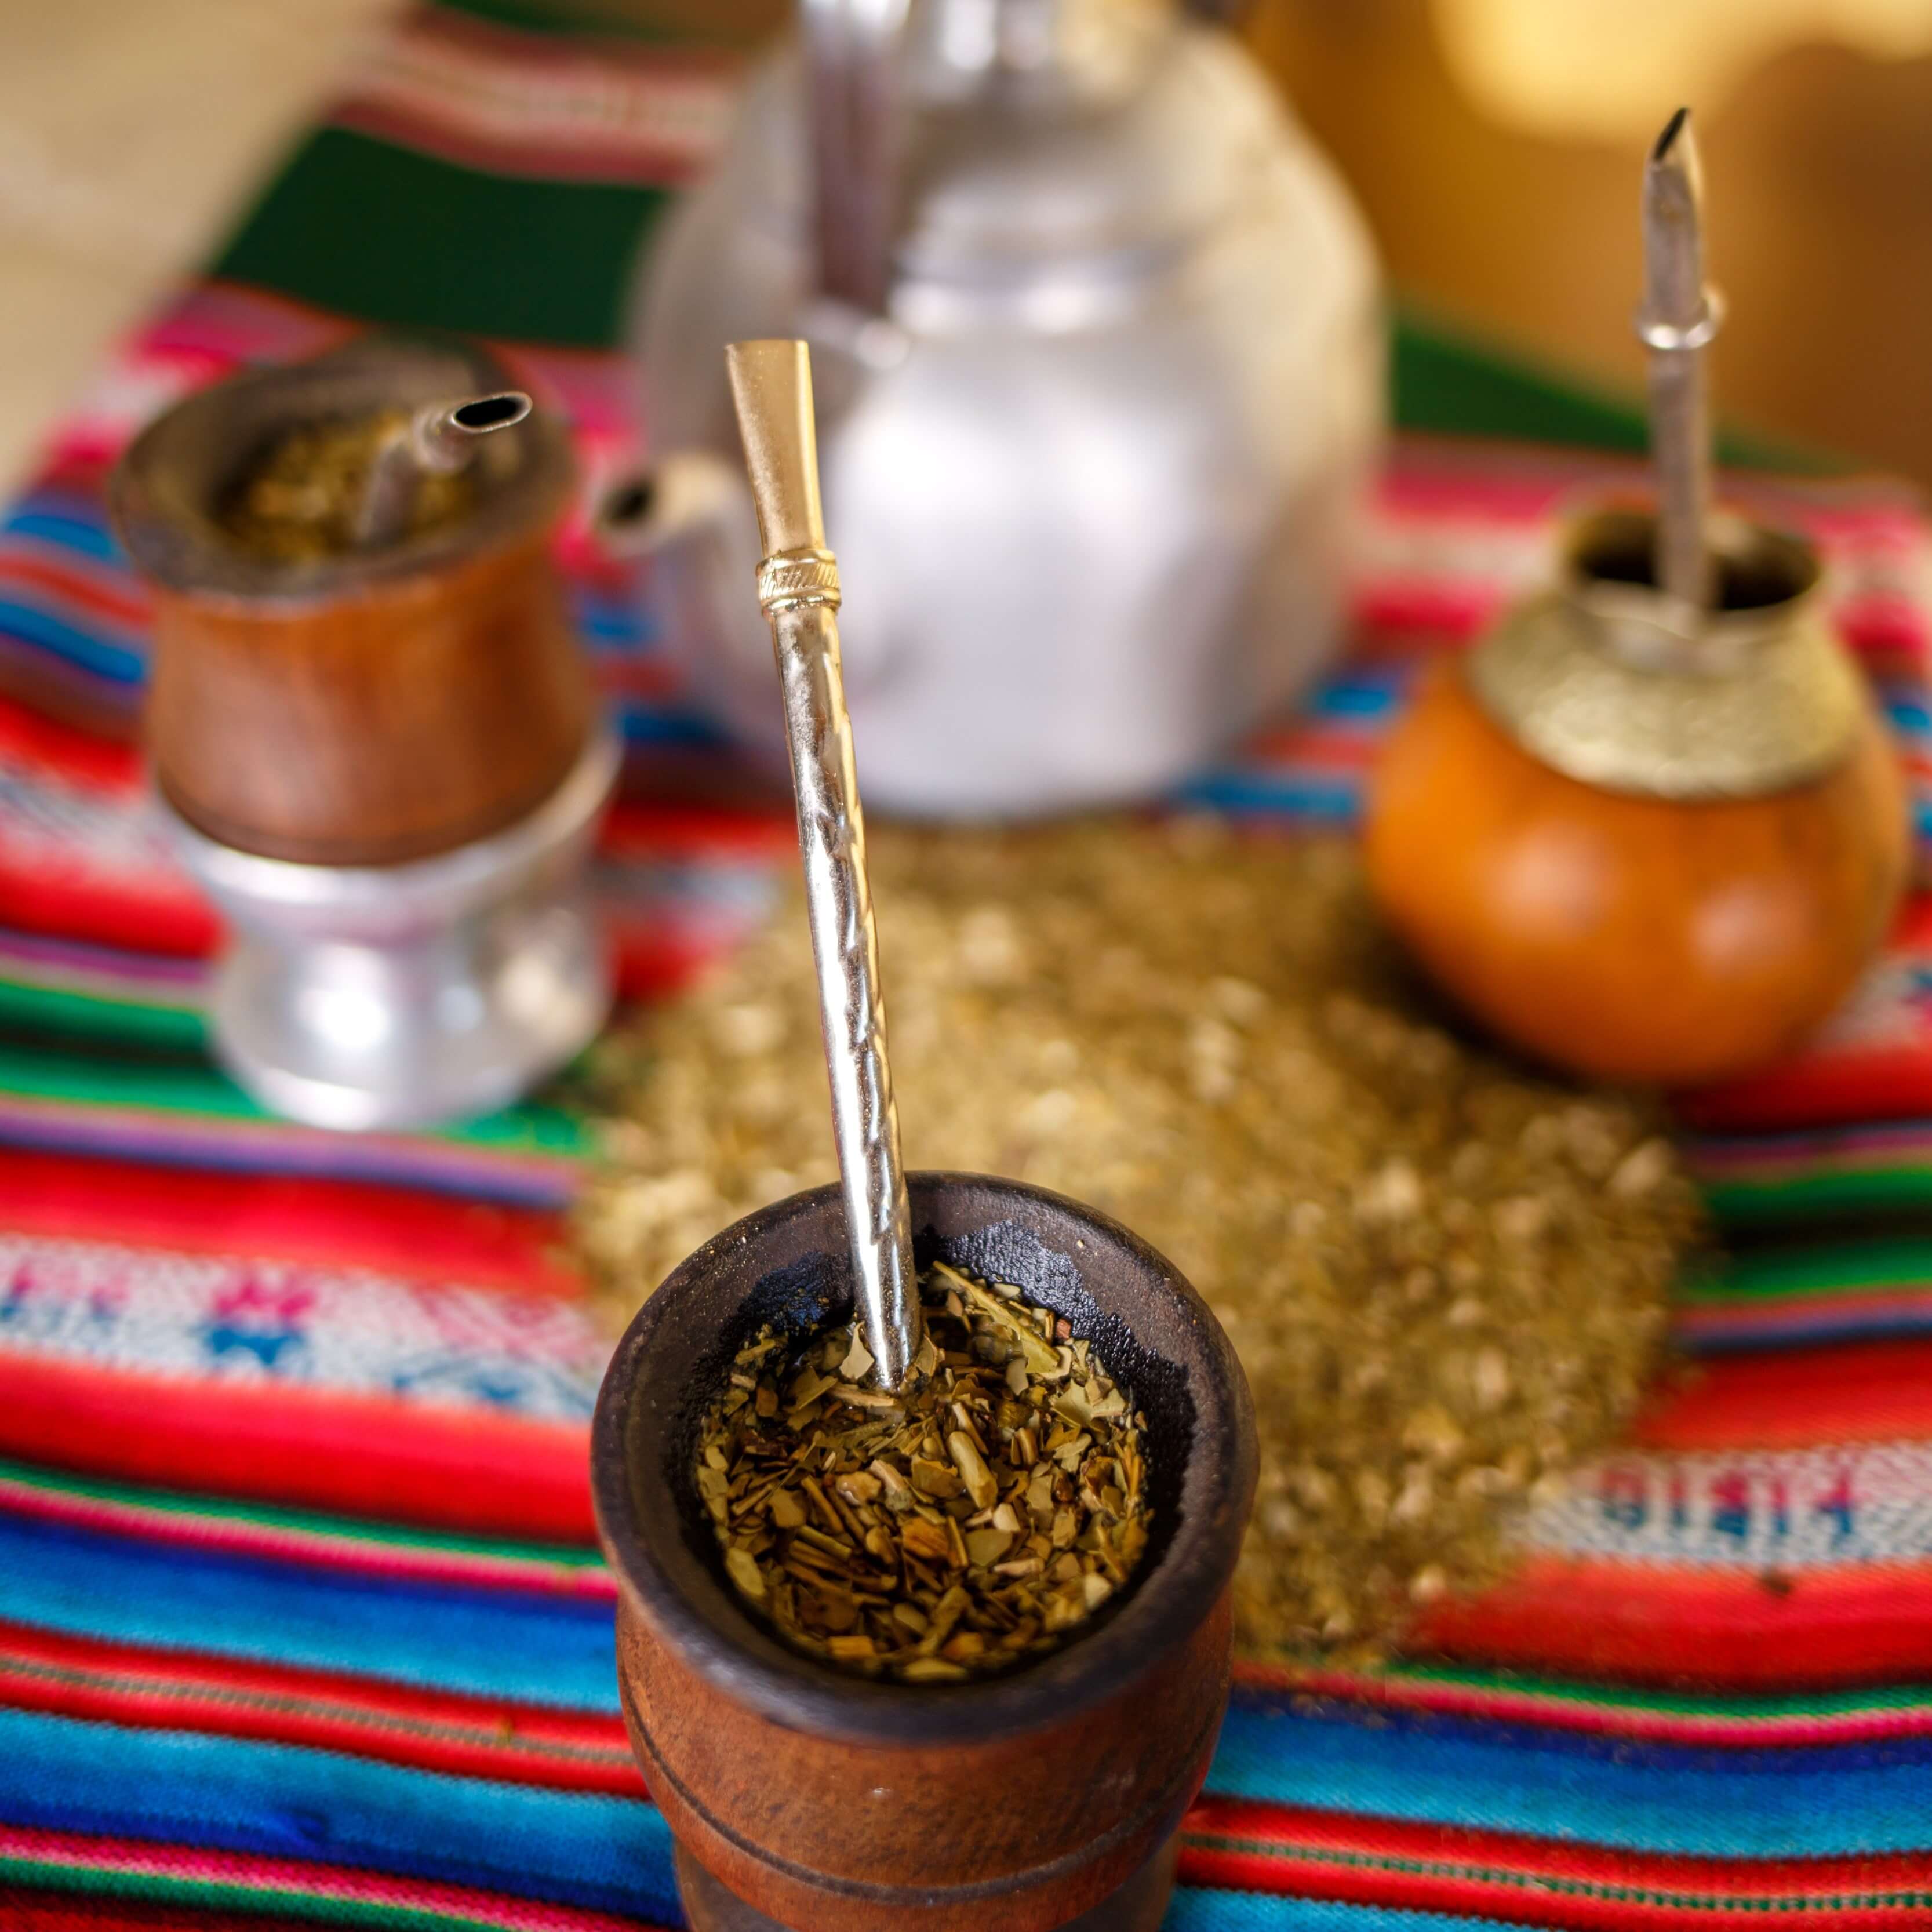 Curado of yerba mate drinking cup. How to do it?